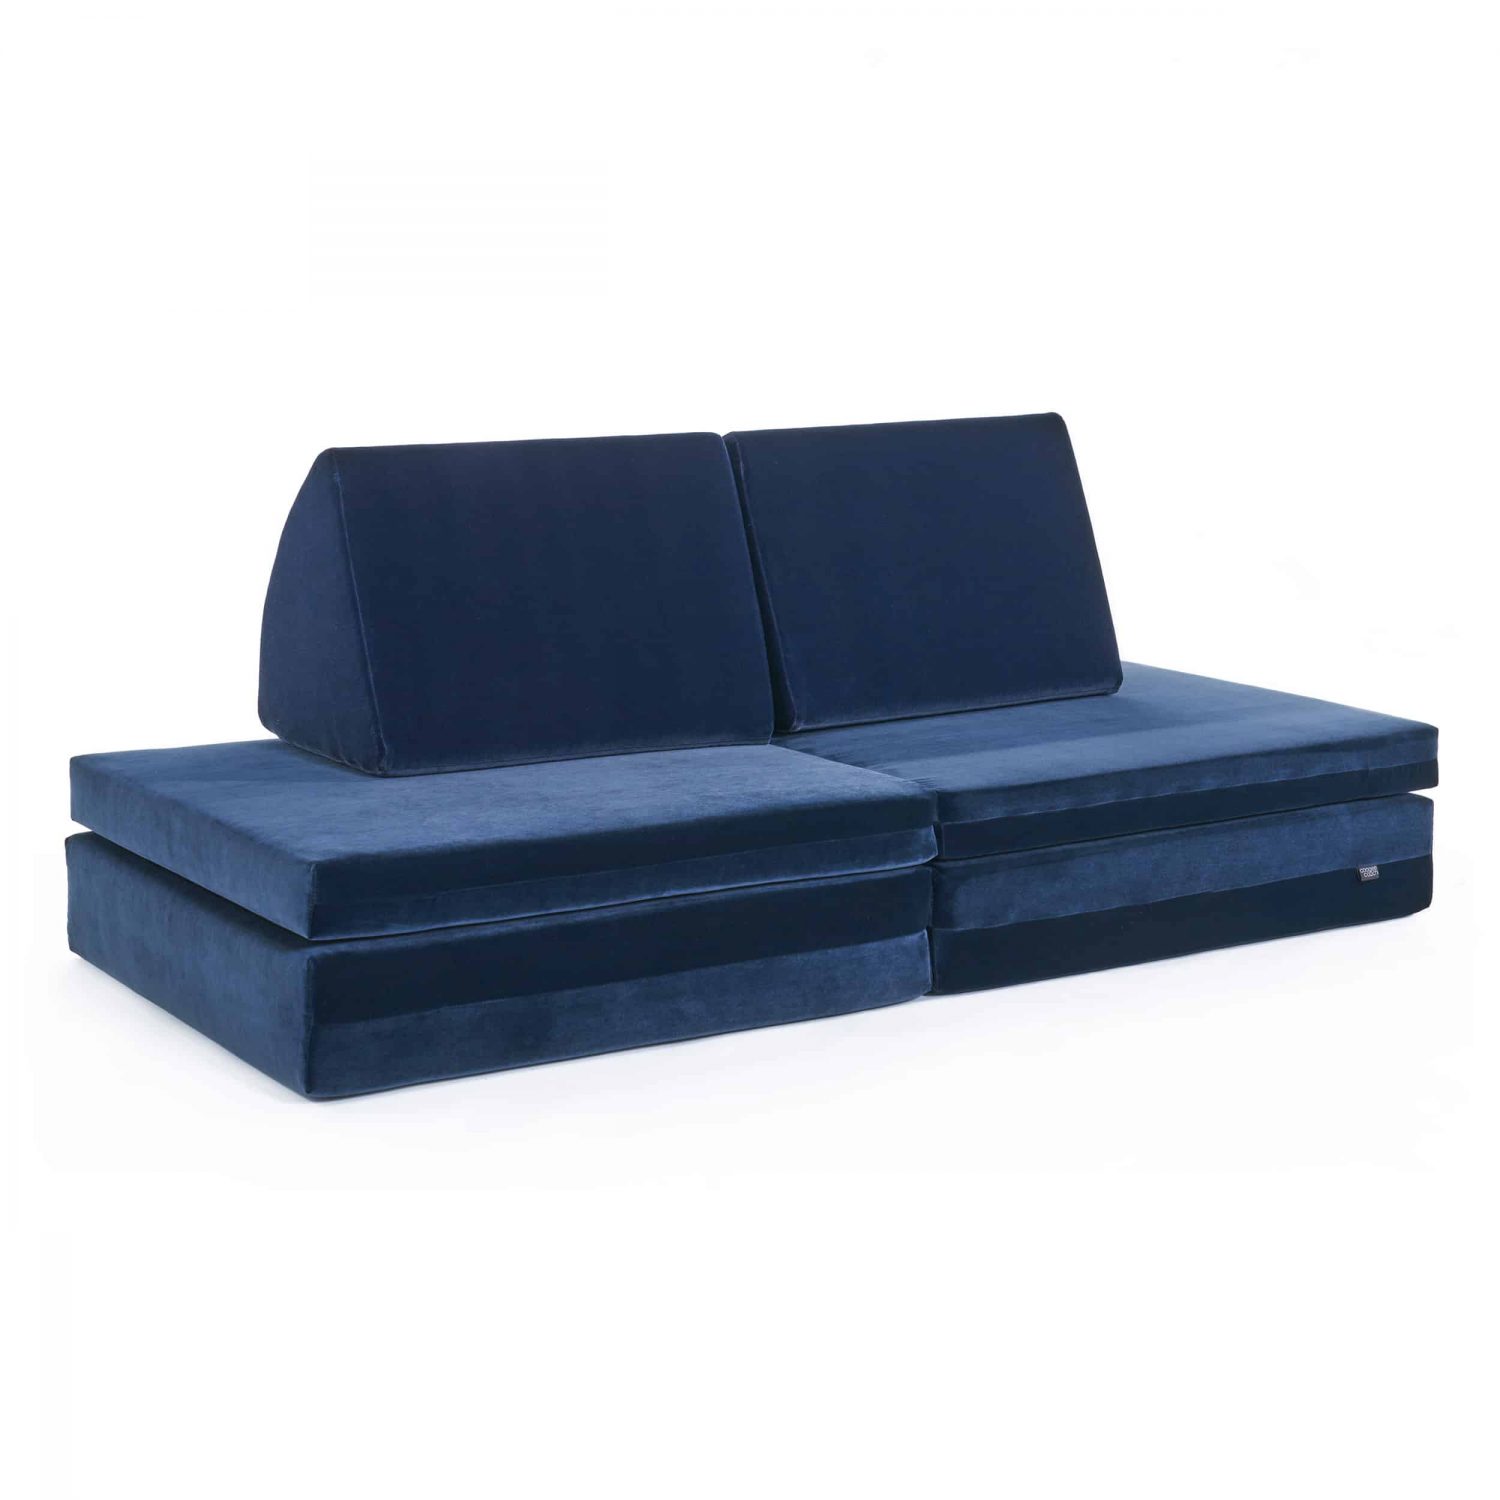 coogeecouch | children's sofa | series: youniverse | color: night-blue dark construction | view: front slanted | made in Germany